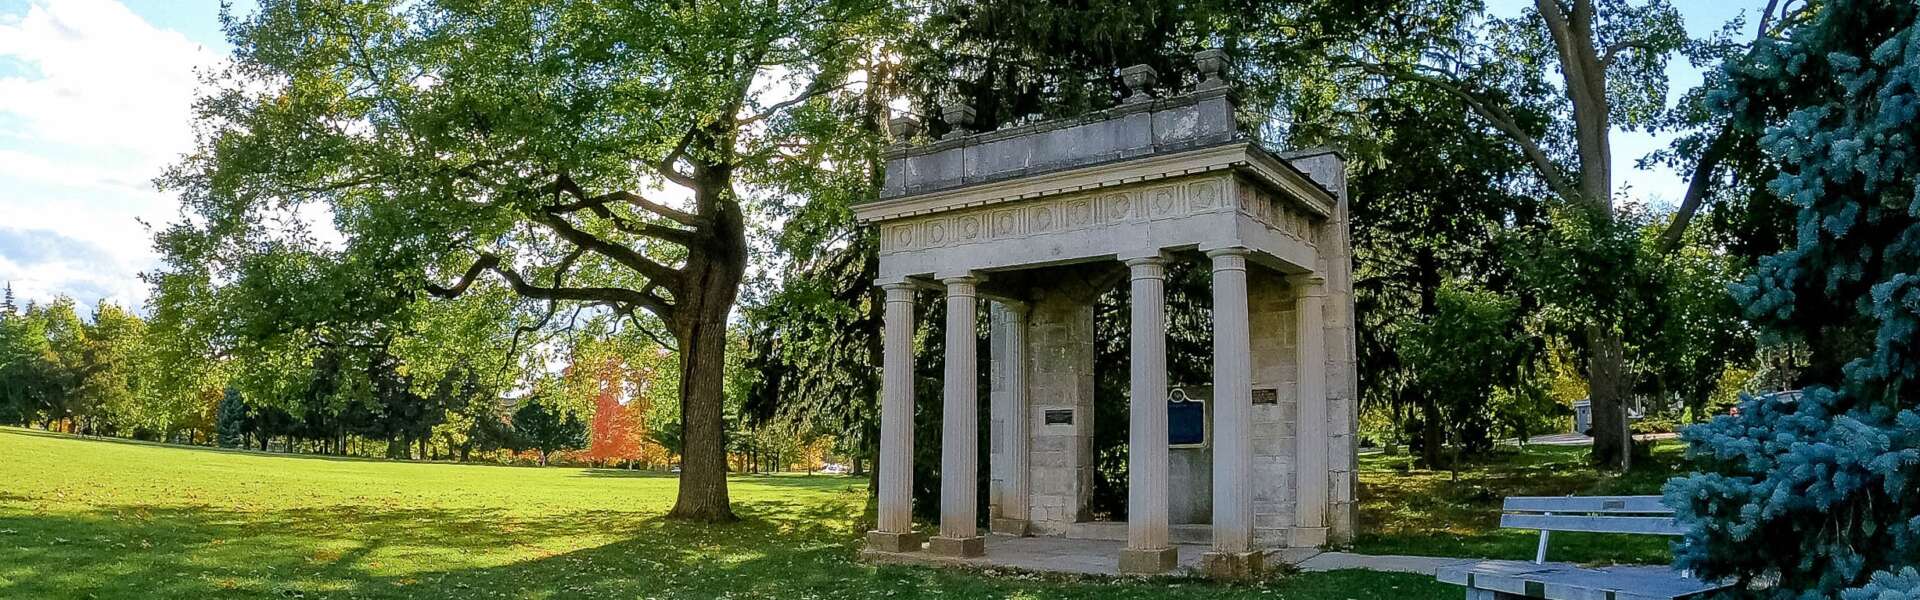 The portico surrounded by trees in the summer